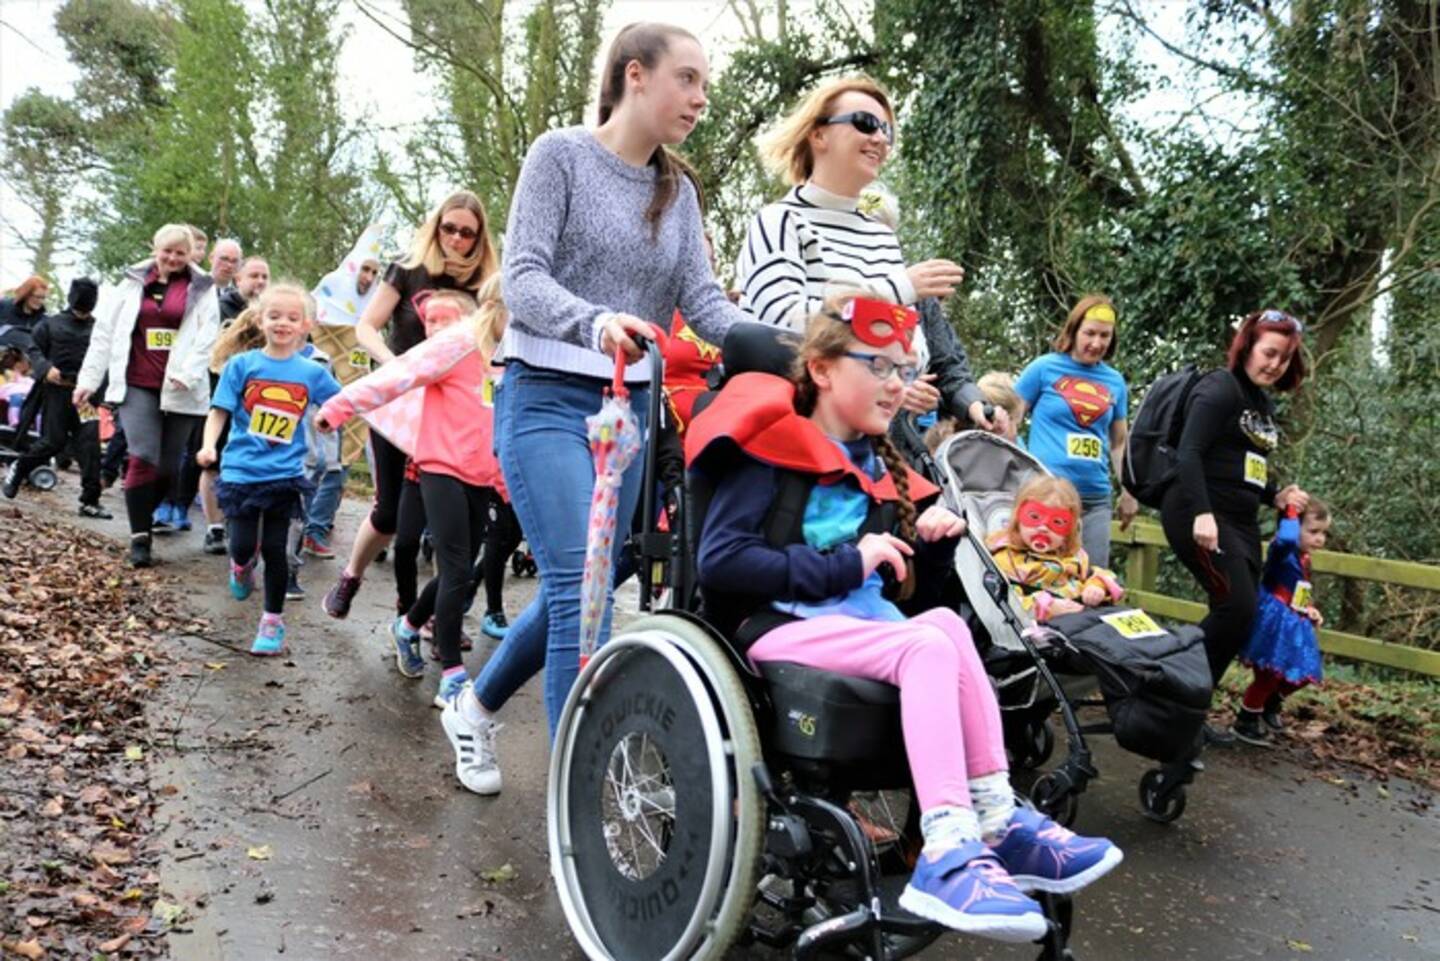 Families with disabled children taking part in a charity walking event in a park.